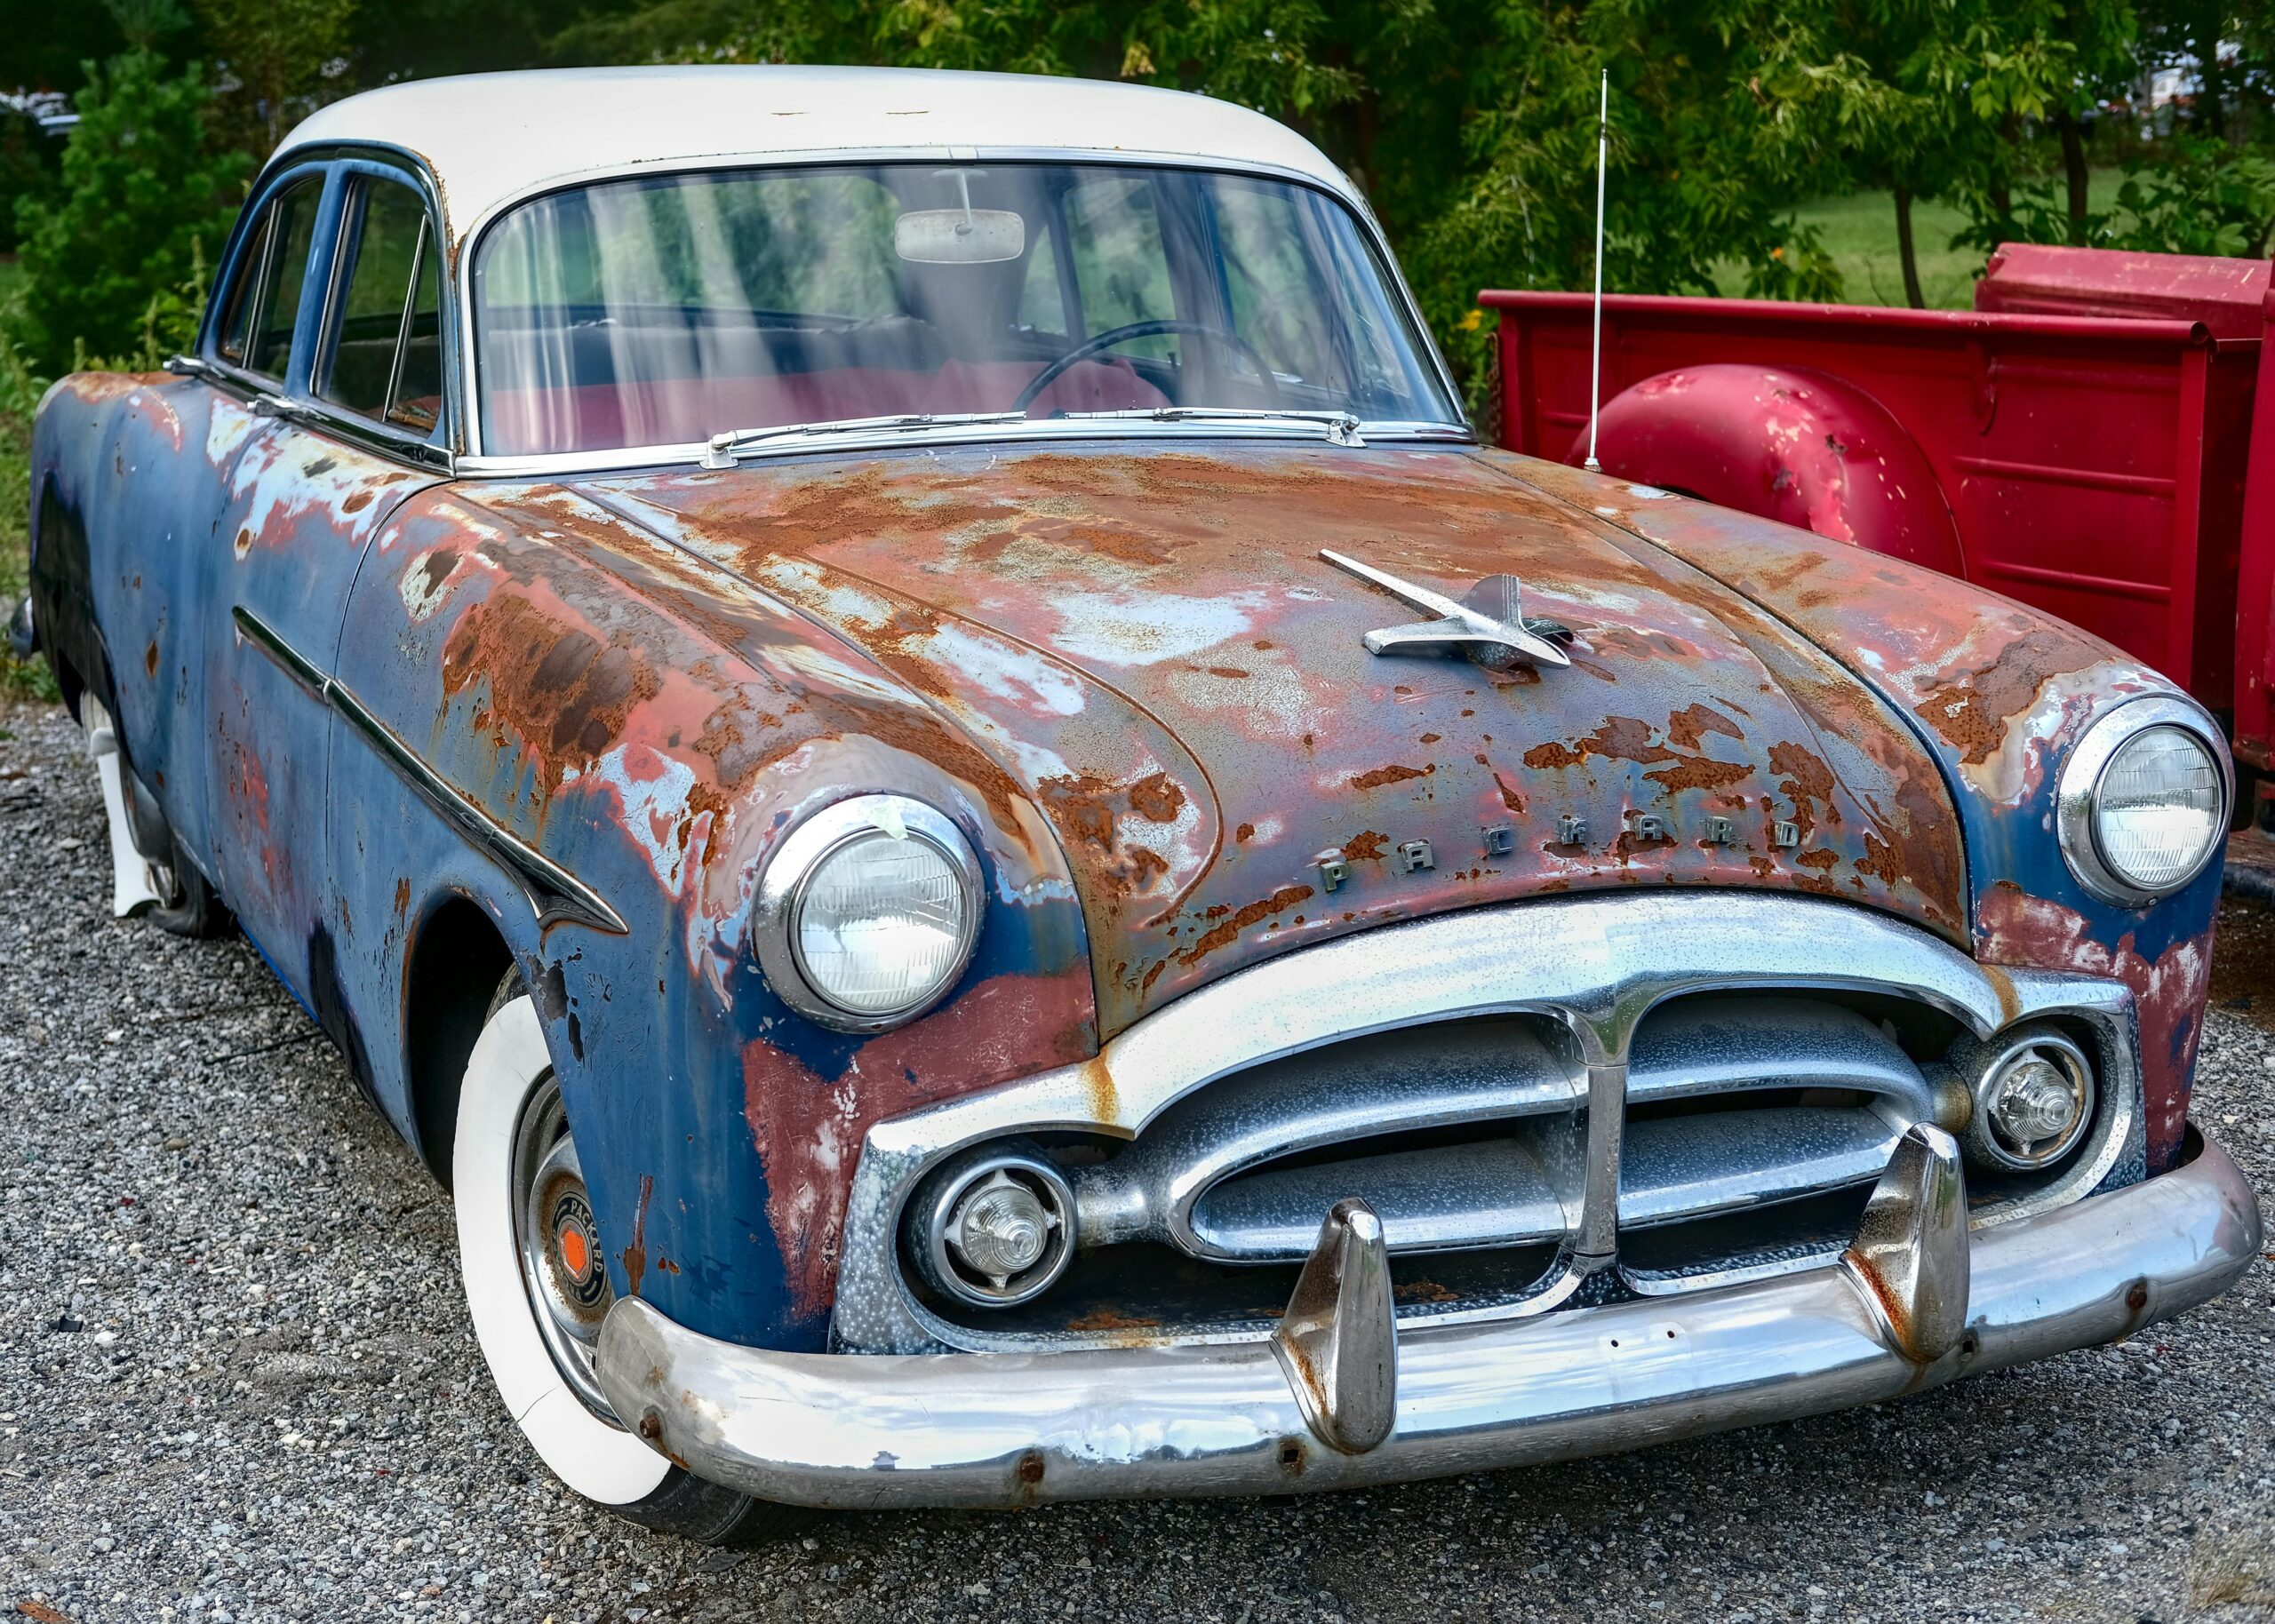 Restoration Resurrection: Why Vintage Cars Still Have a Place in Modern Times